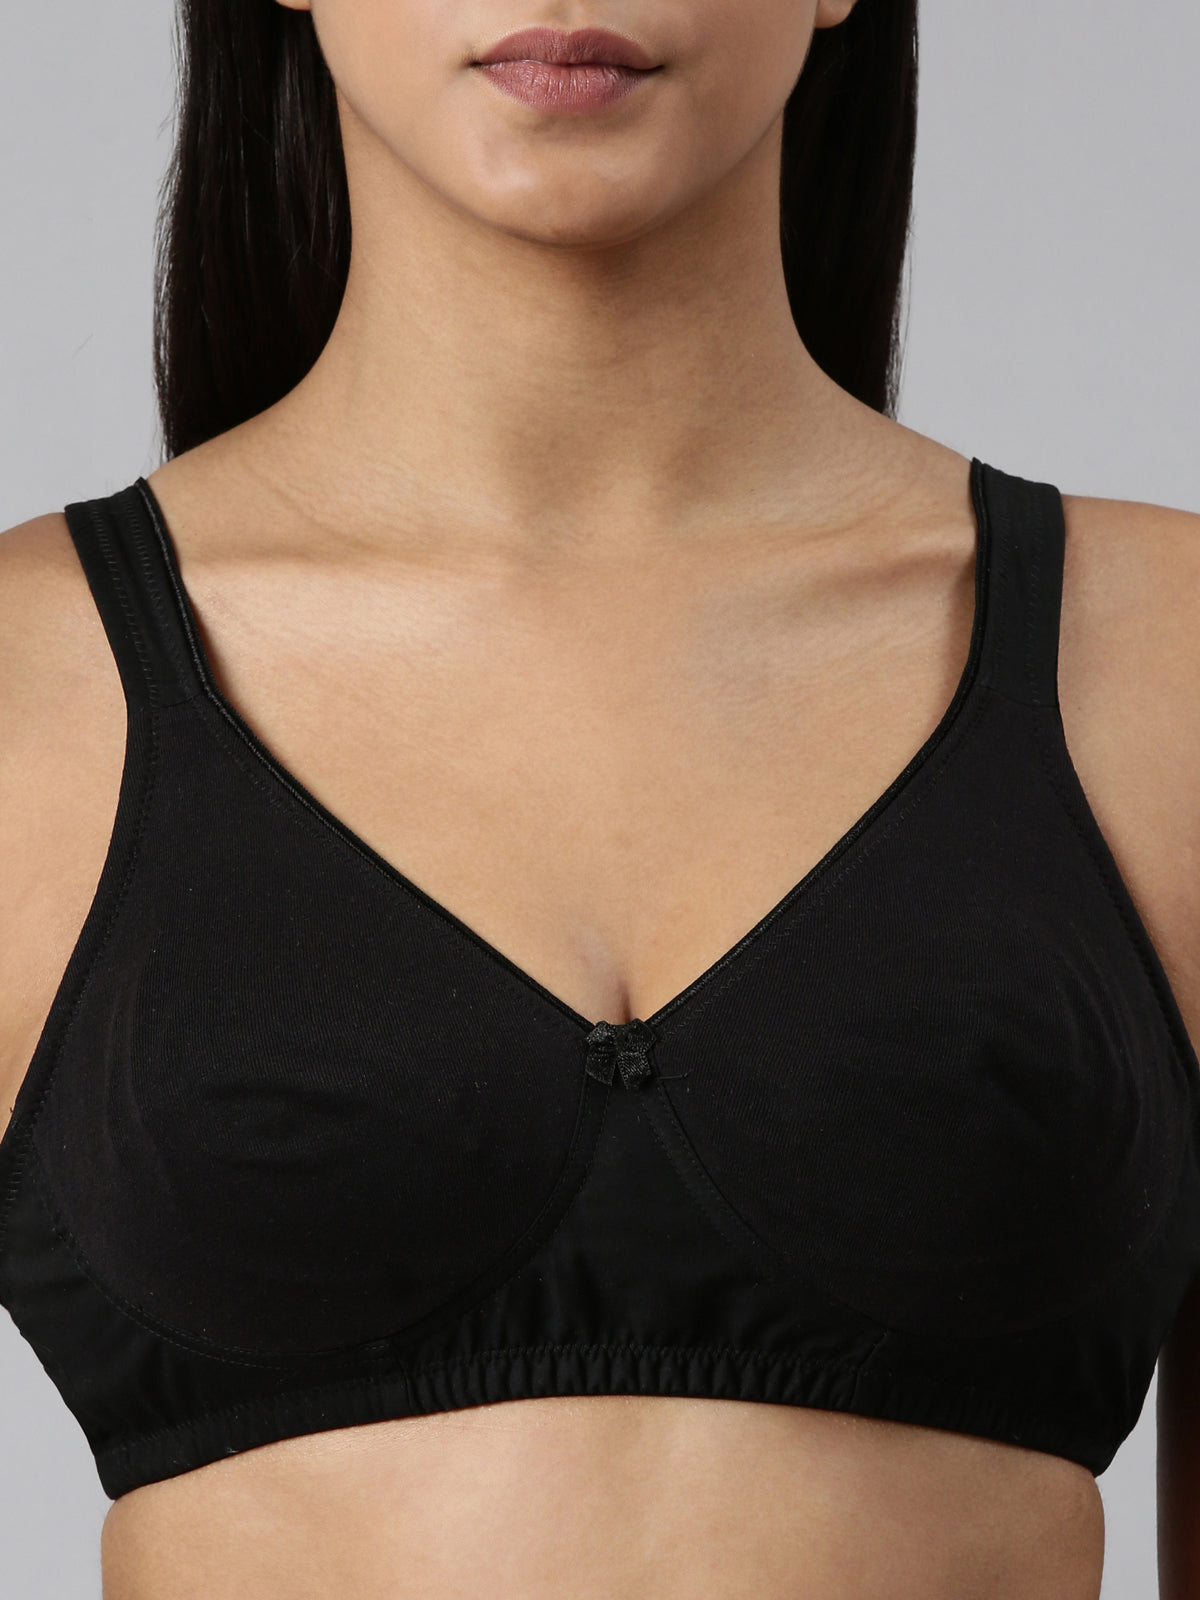 blossom-circlet-black1-woven knitted-support bra